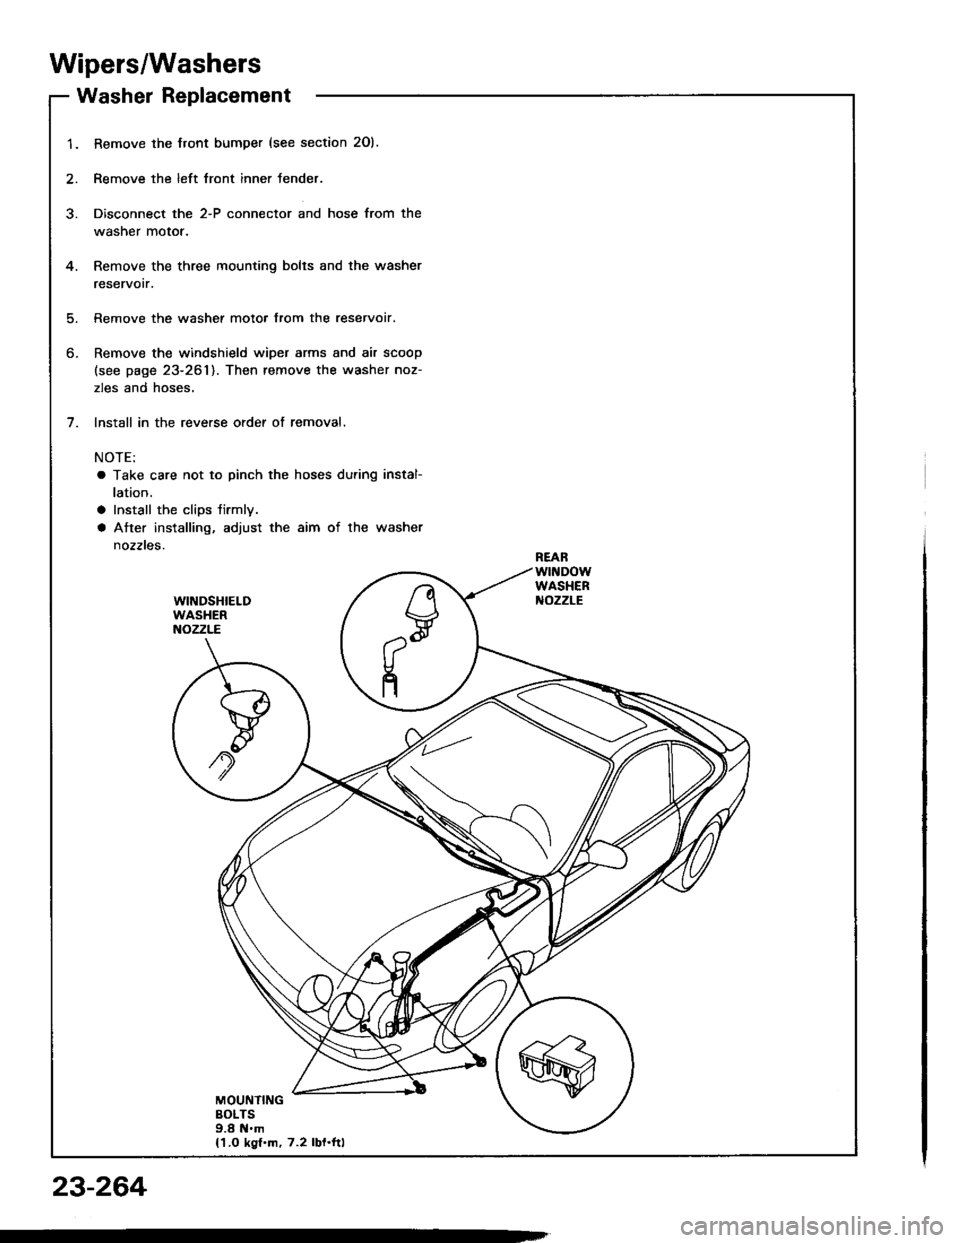 HONDA INTEGRA 1994 4.G User Guide Wipers/Washers
Washer Replacement
1.
5.
6.
Bemove the Jront bumper (see section 2Ol.
Remove the left lront inner fender.
Disconnect the 2-P connector and hose from the
washer motor.
Remove the three m